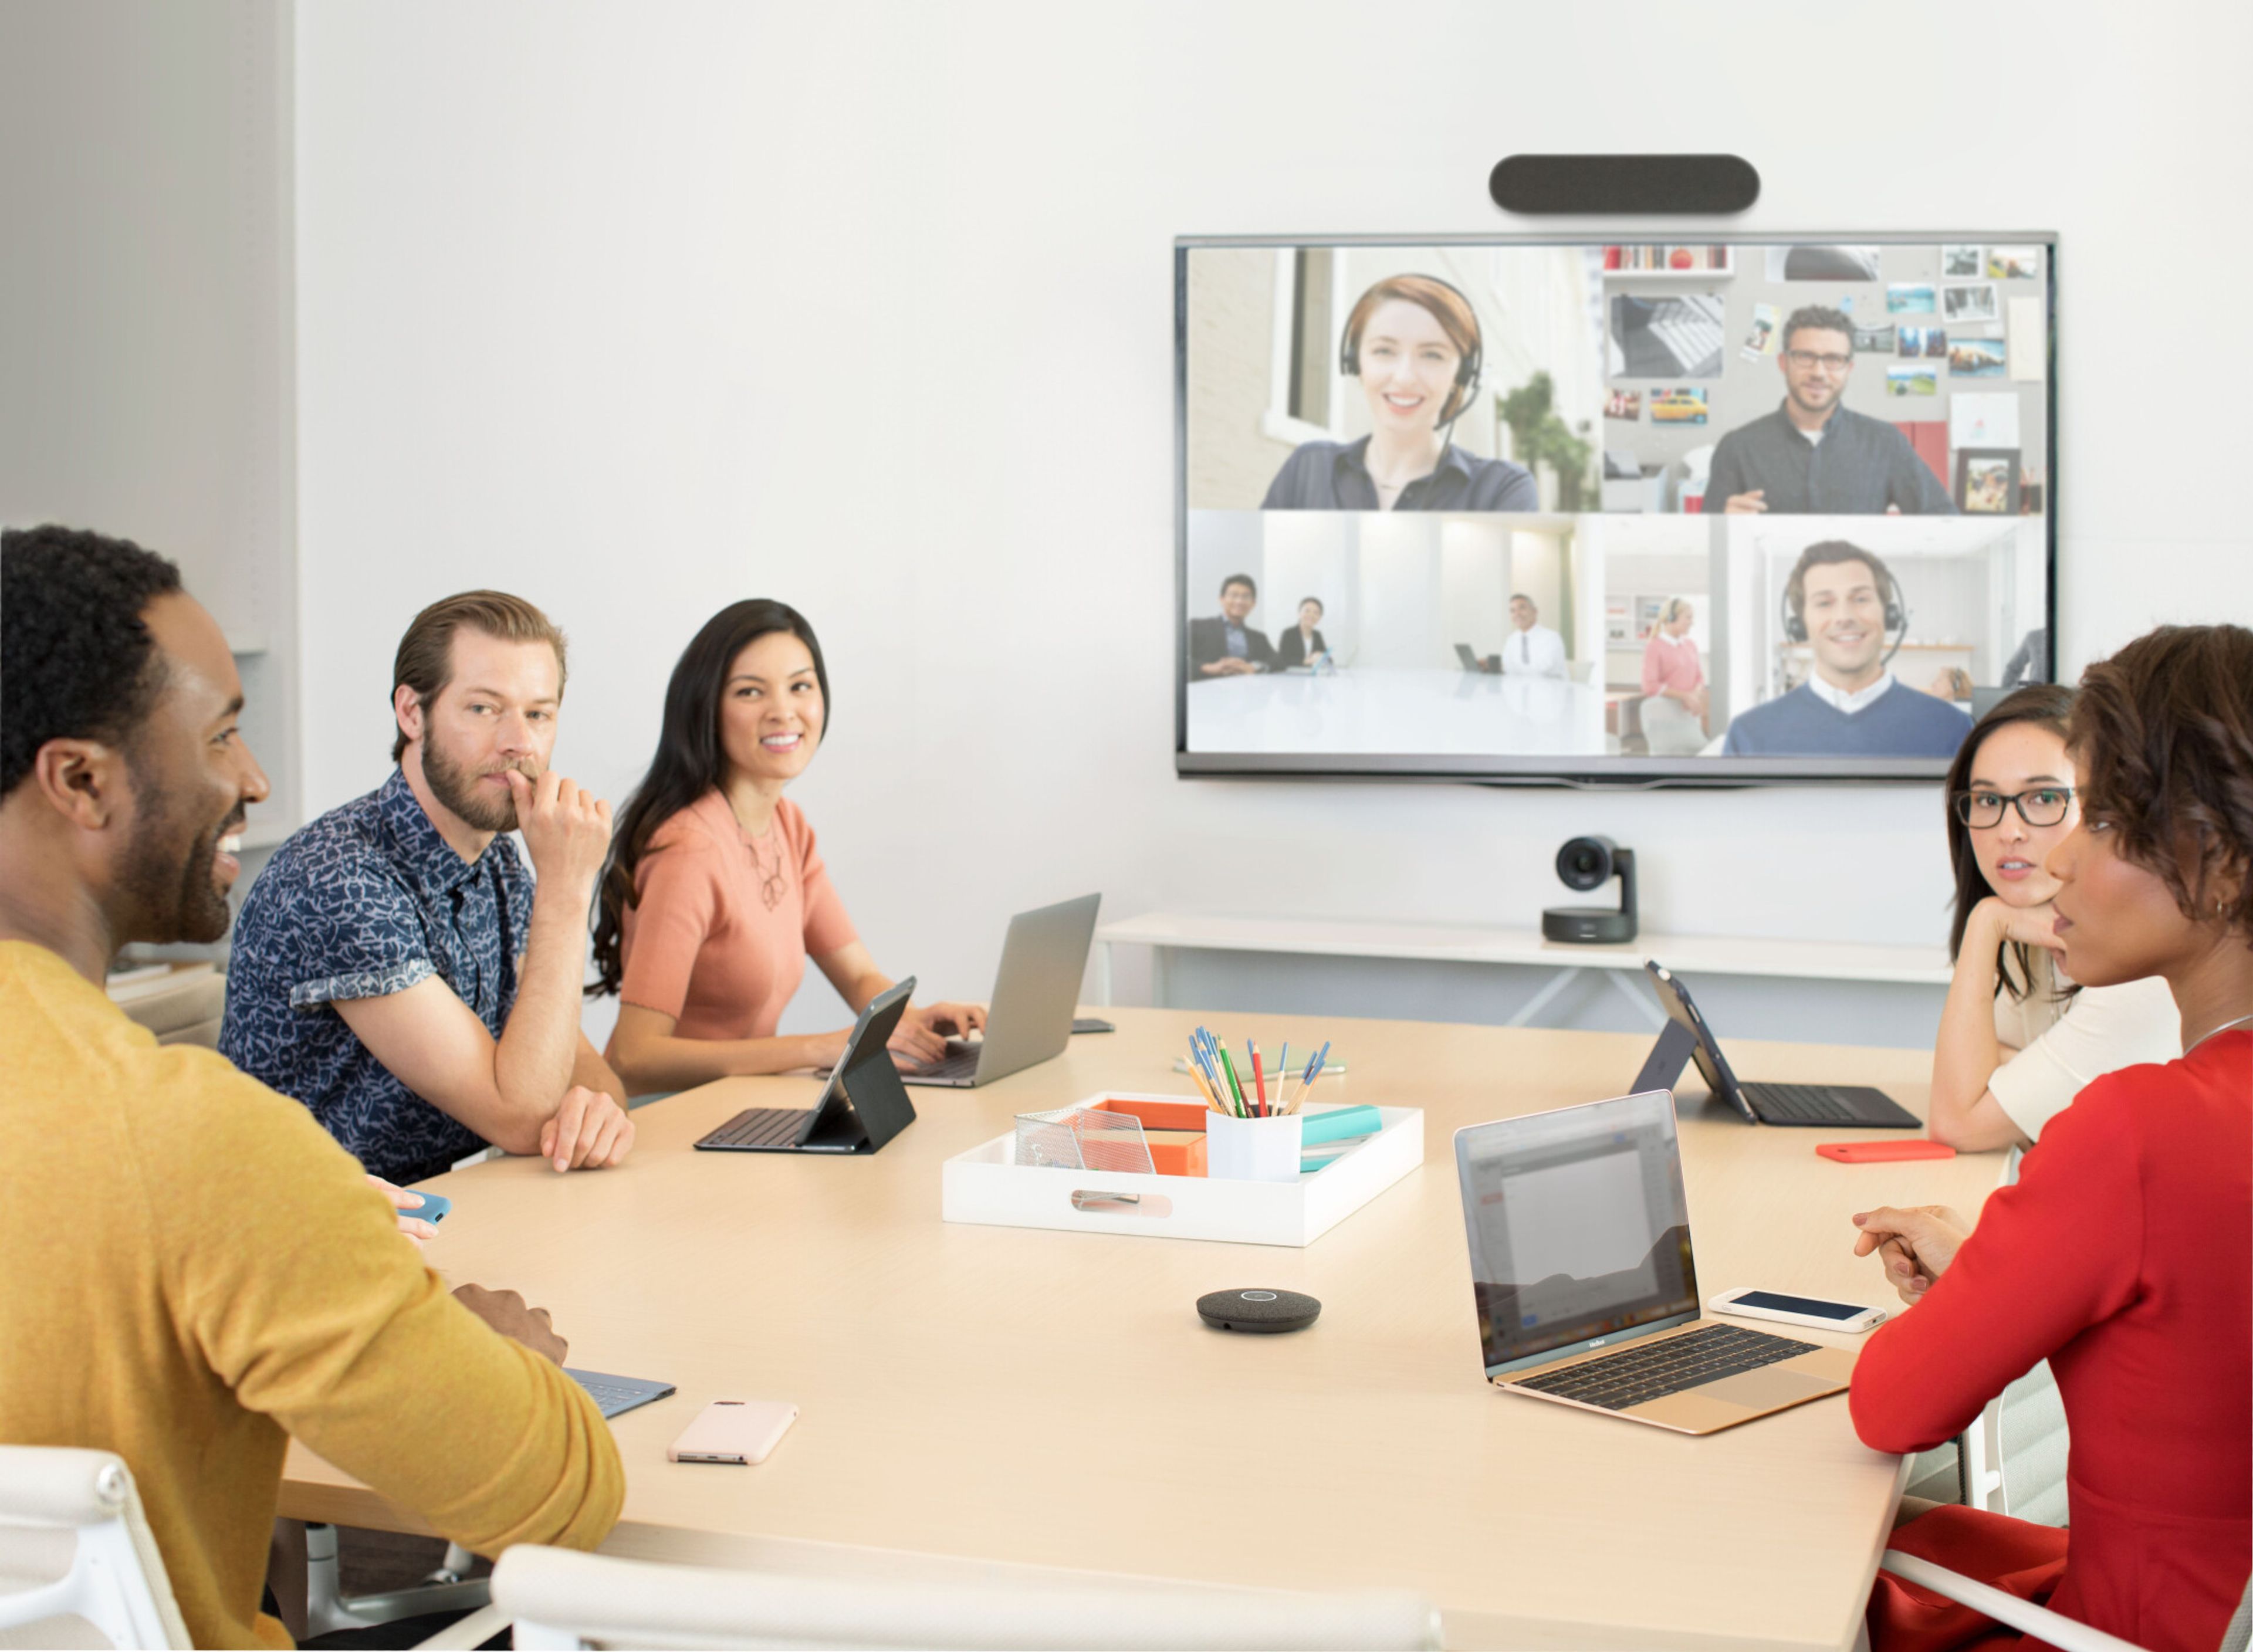 Hybrid meeting office setup with video conferencing